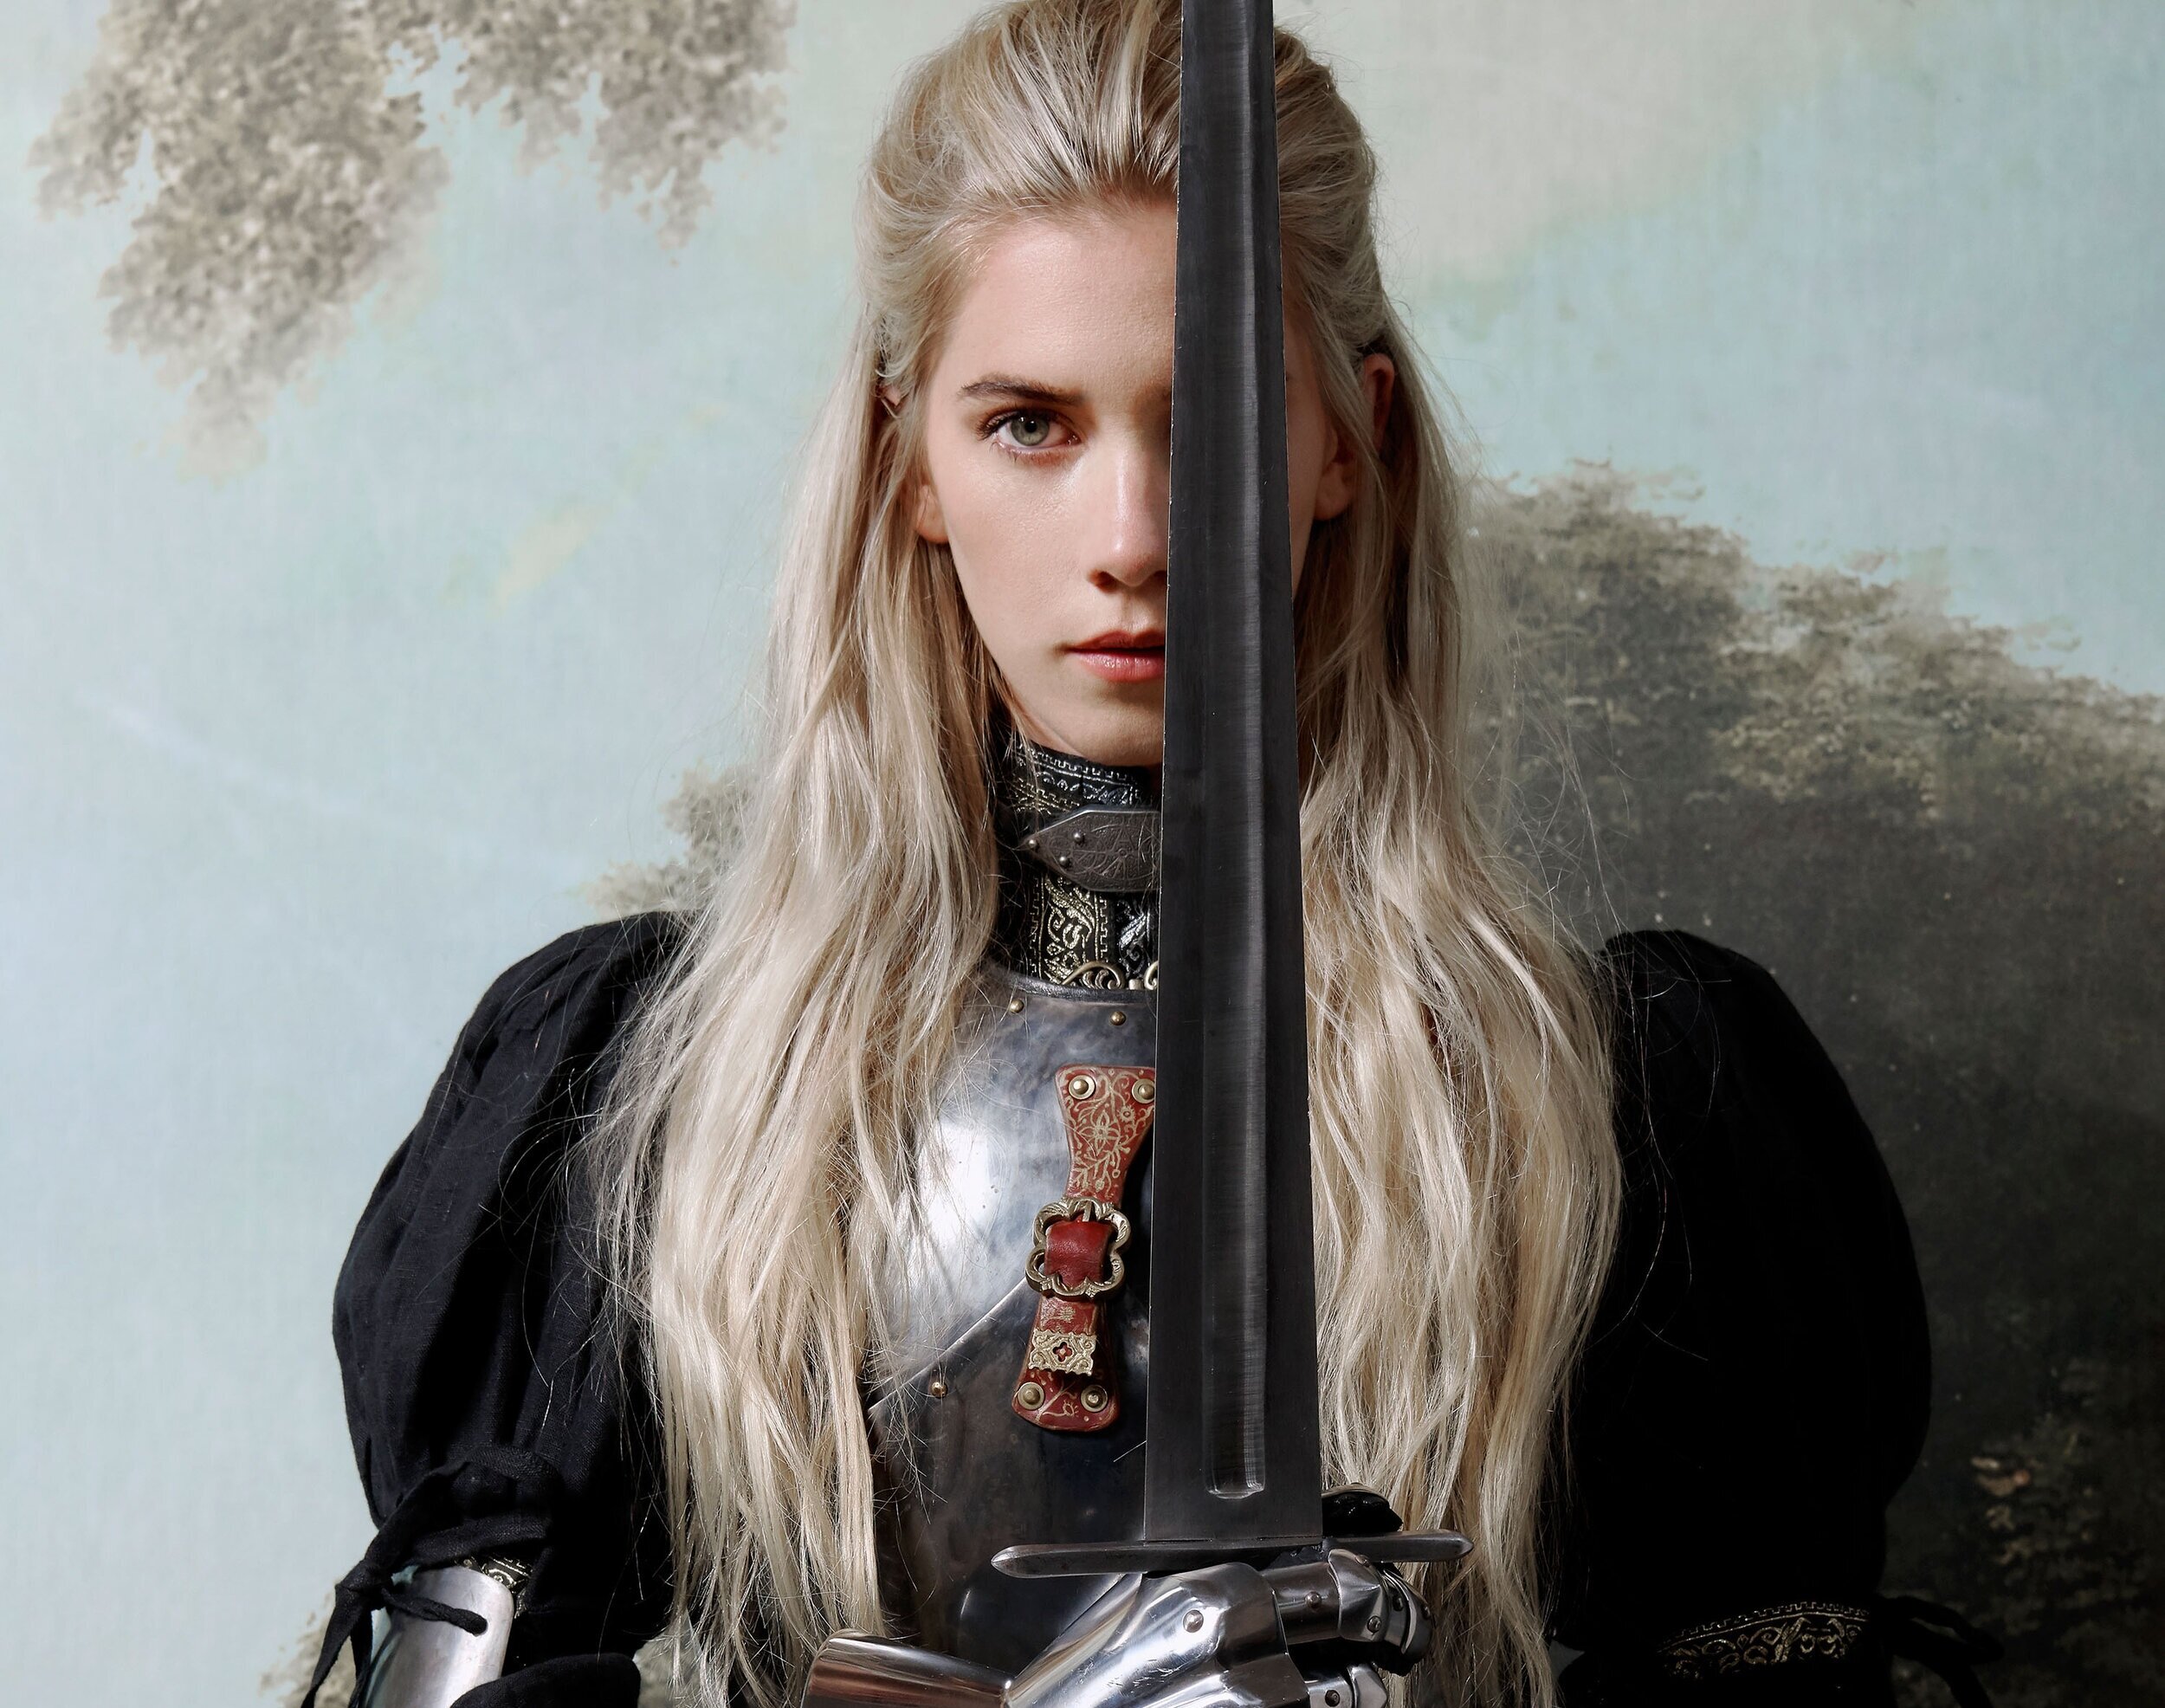 Woodes wears a suit of armour and holds a sword that covers half her face